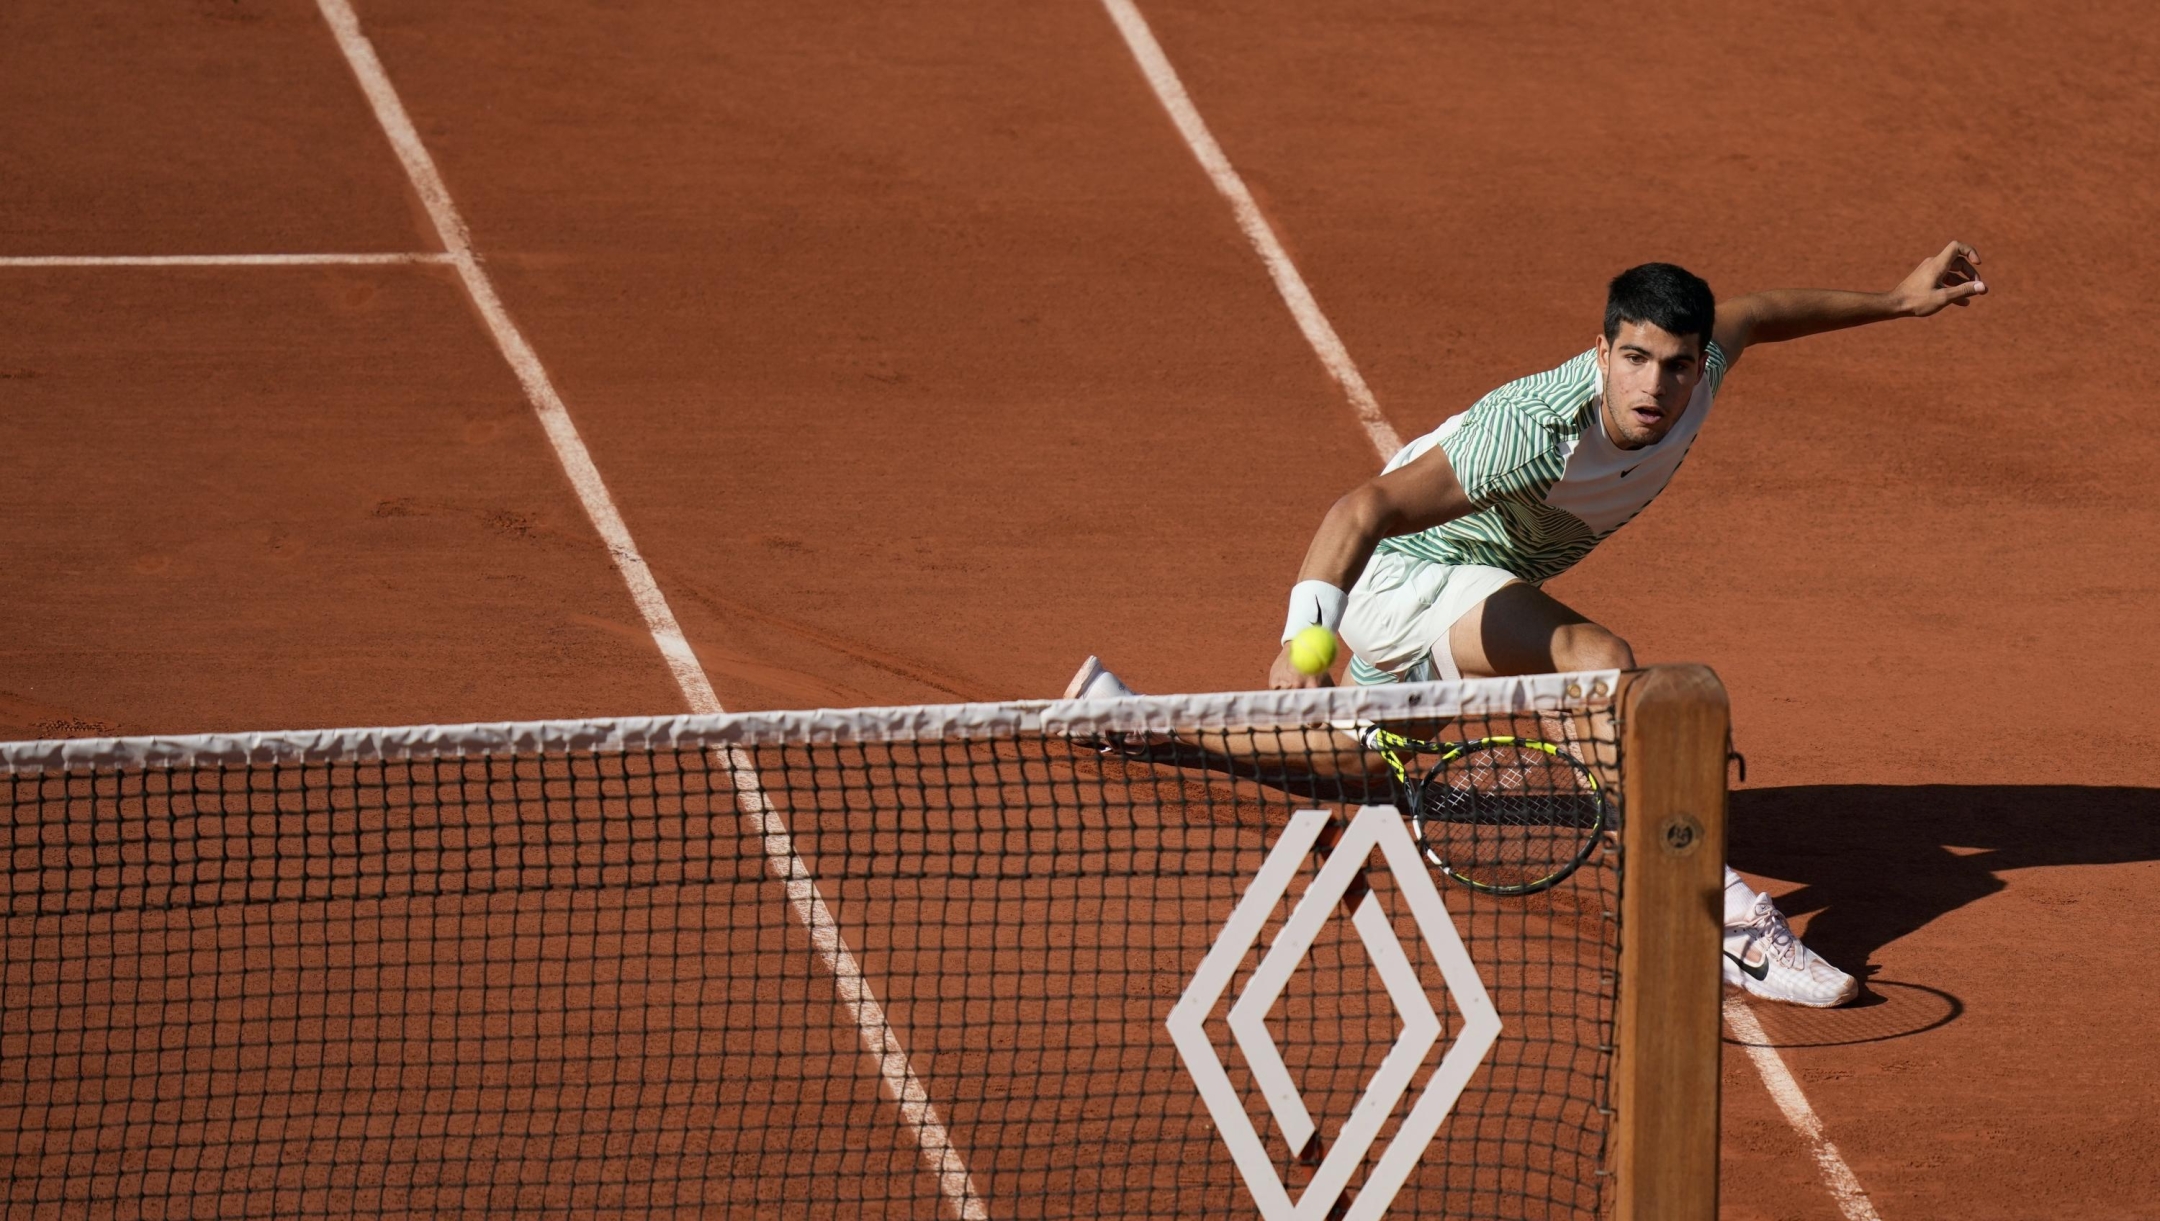 Spain's Carlos Alcaraz plays a volley against Italy's Lorenzo Musetti during their fourth round match of the French Open tennis tournament at the Roland Garros stadium in Paris, Sunday, June 4, 2023. (AP Photo/Thibault Camus)